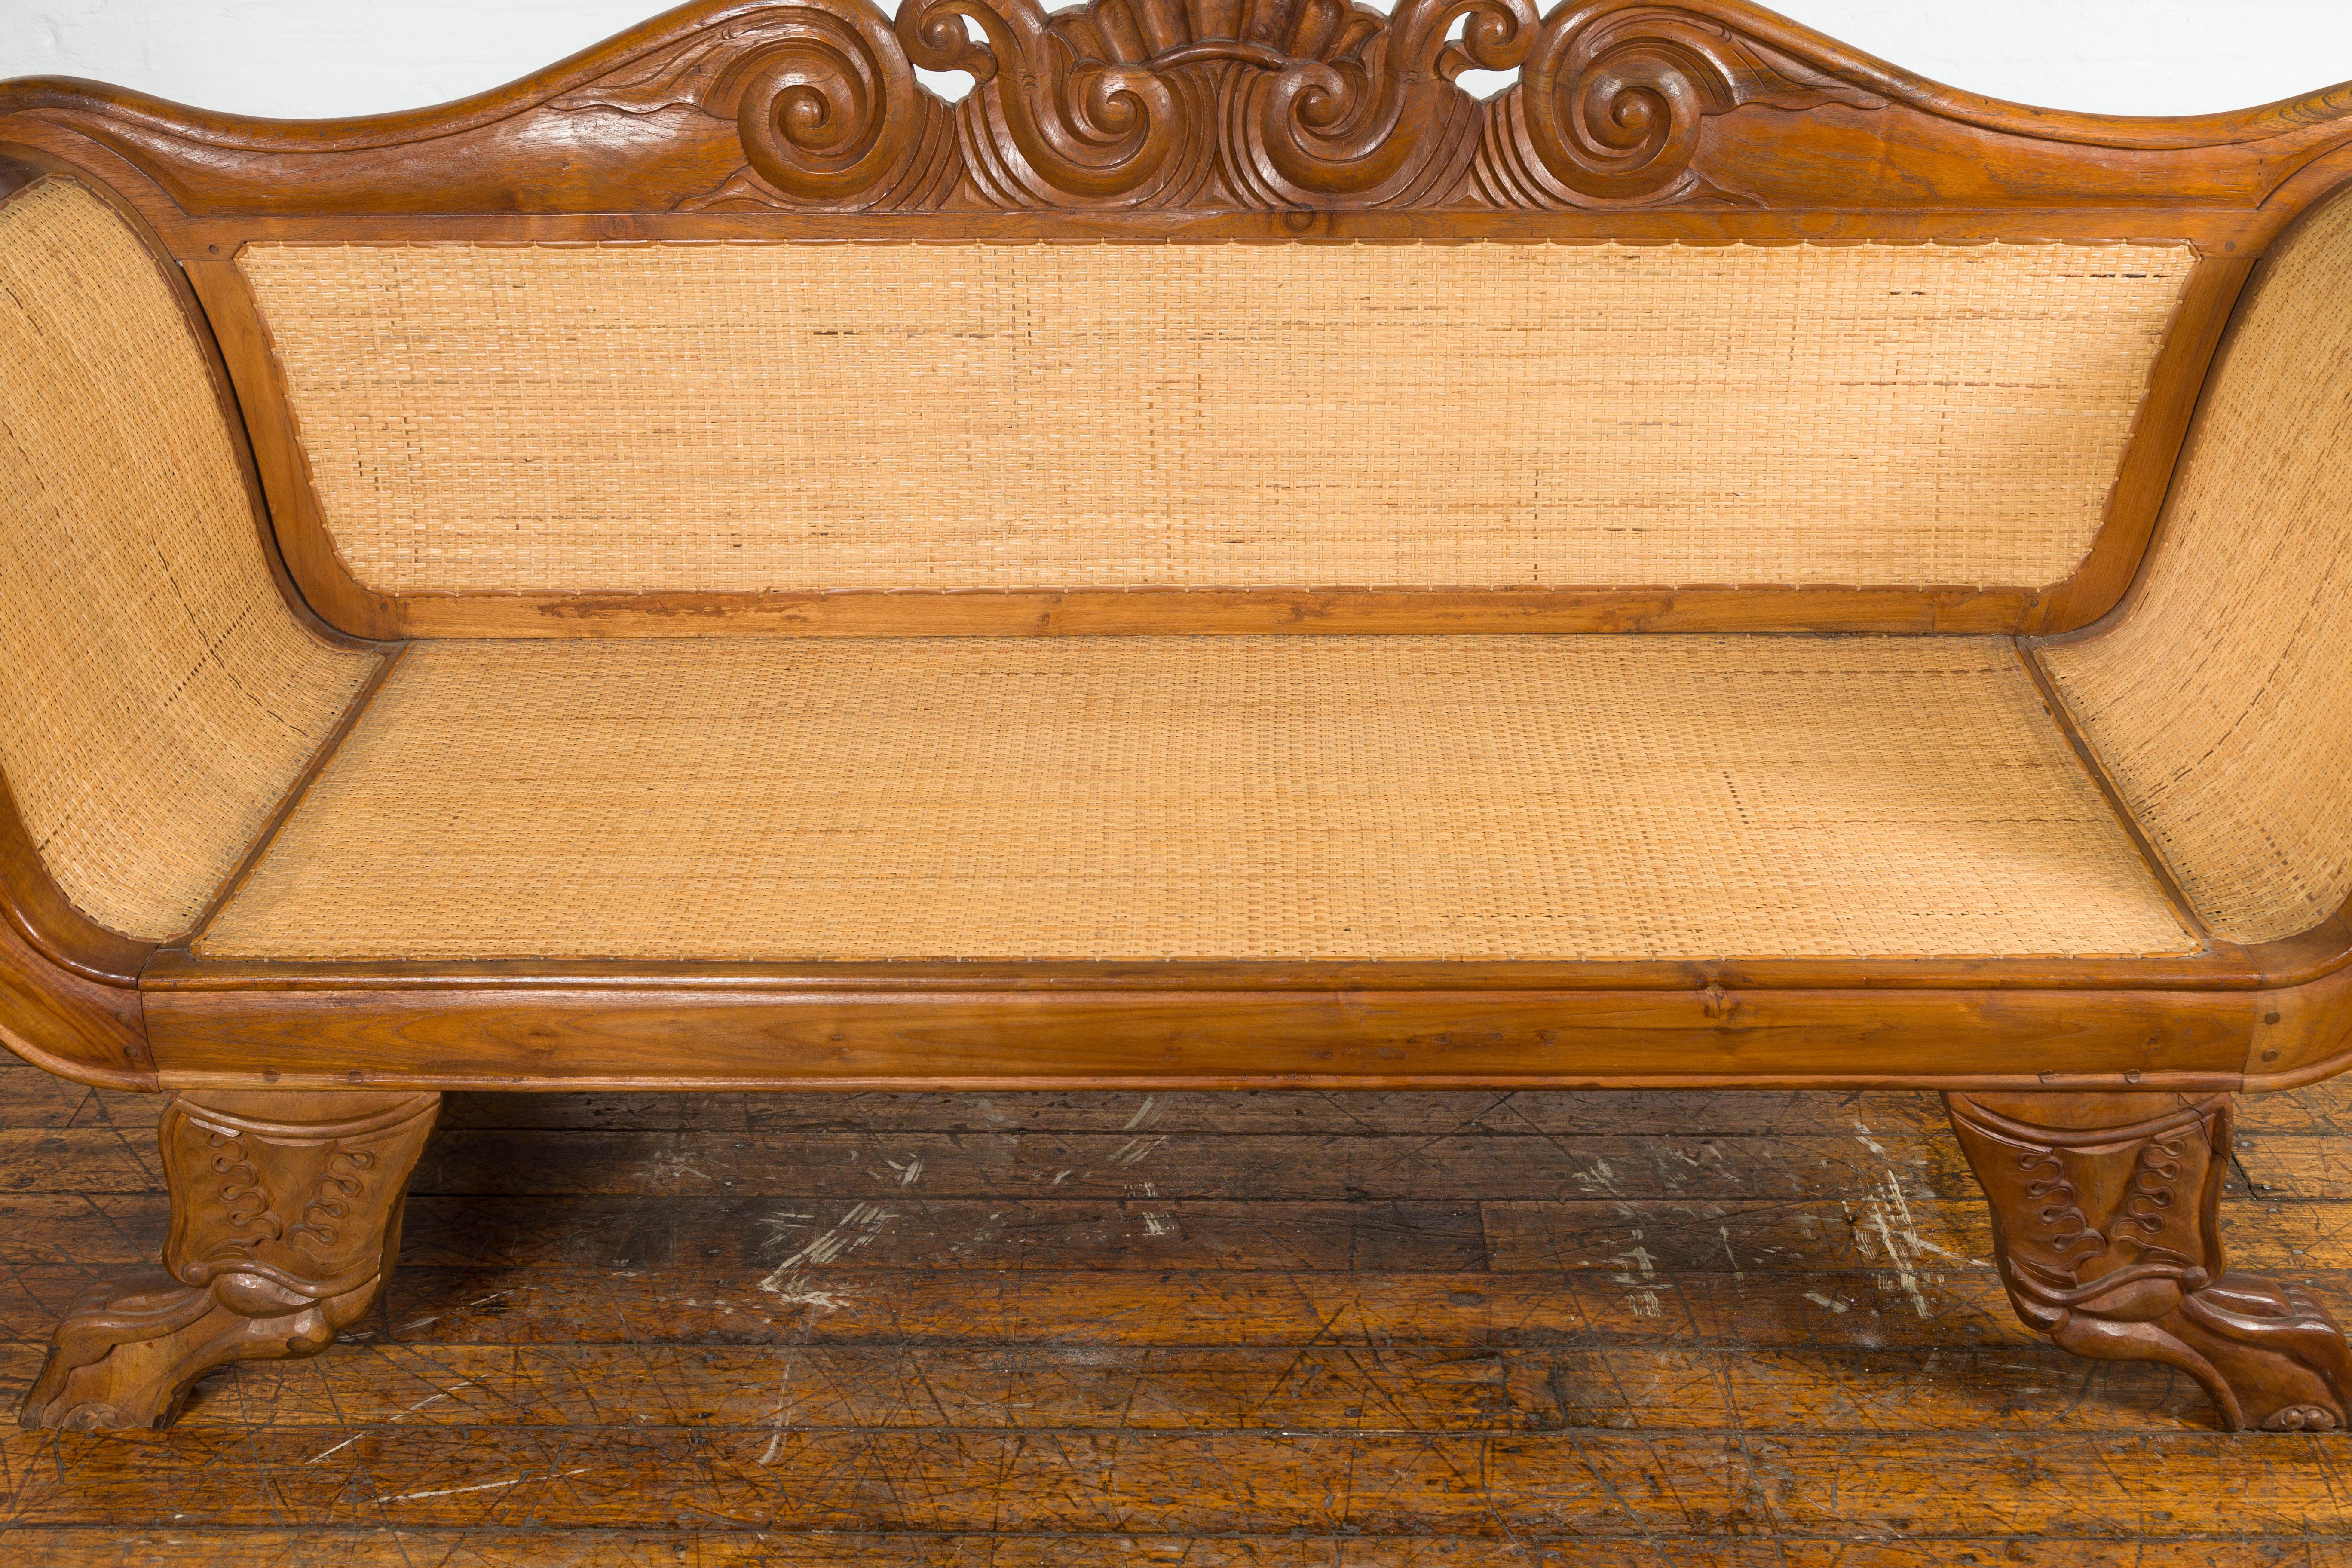 Dutch Colonial Javanese Teak Settee with Carved Décor and Inset Woven Rattan For Sale 4